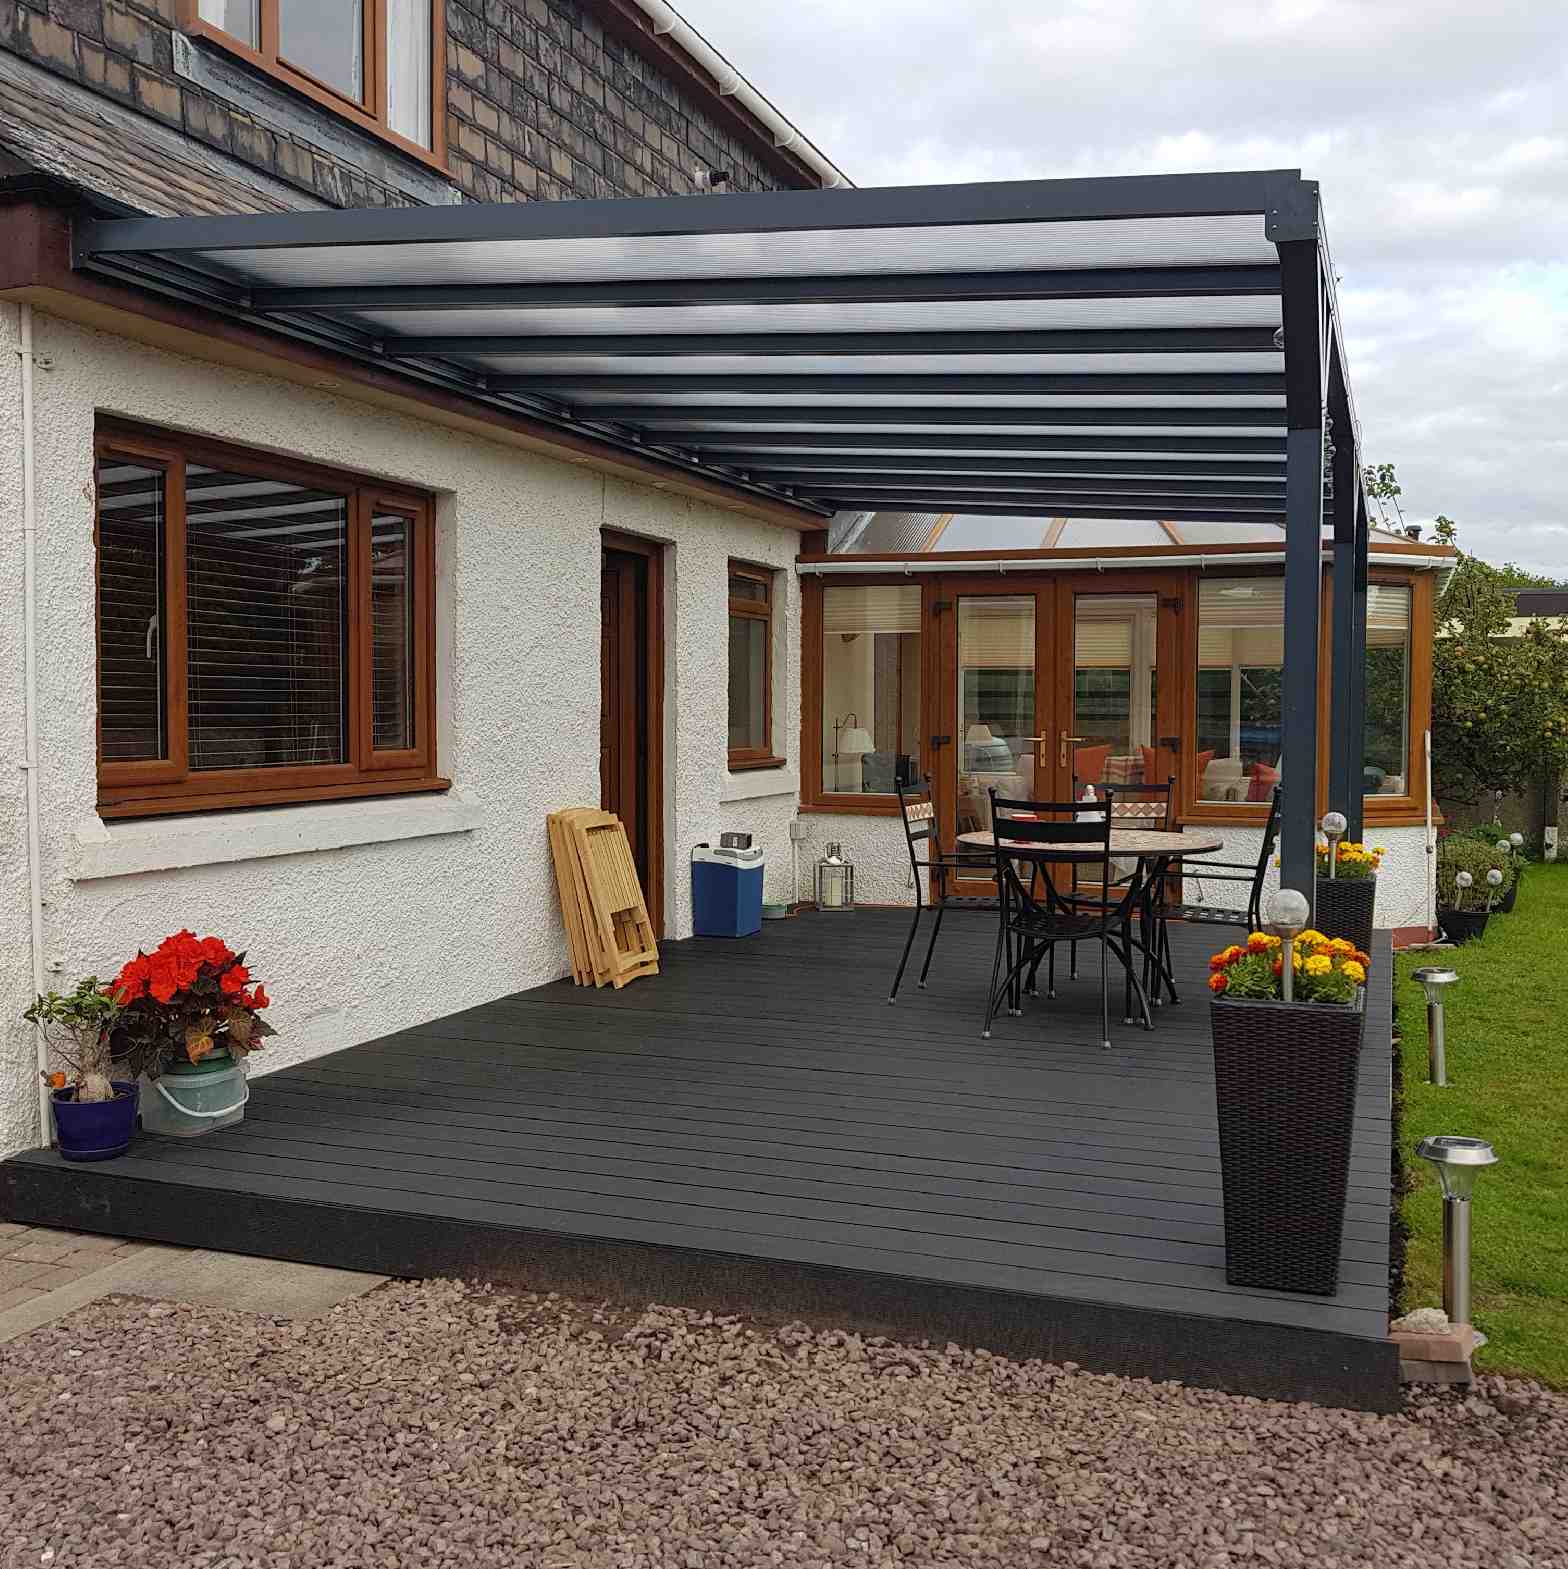 Buy Omega Verandah, Anthracite Grey, 16mm Polycarbonate Glazing - 11.6m (W) x 3.0m (P), (5) Supporting Posts online today